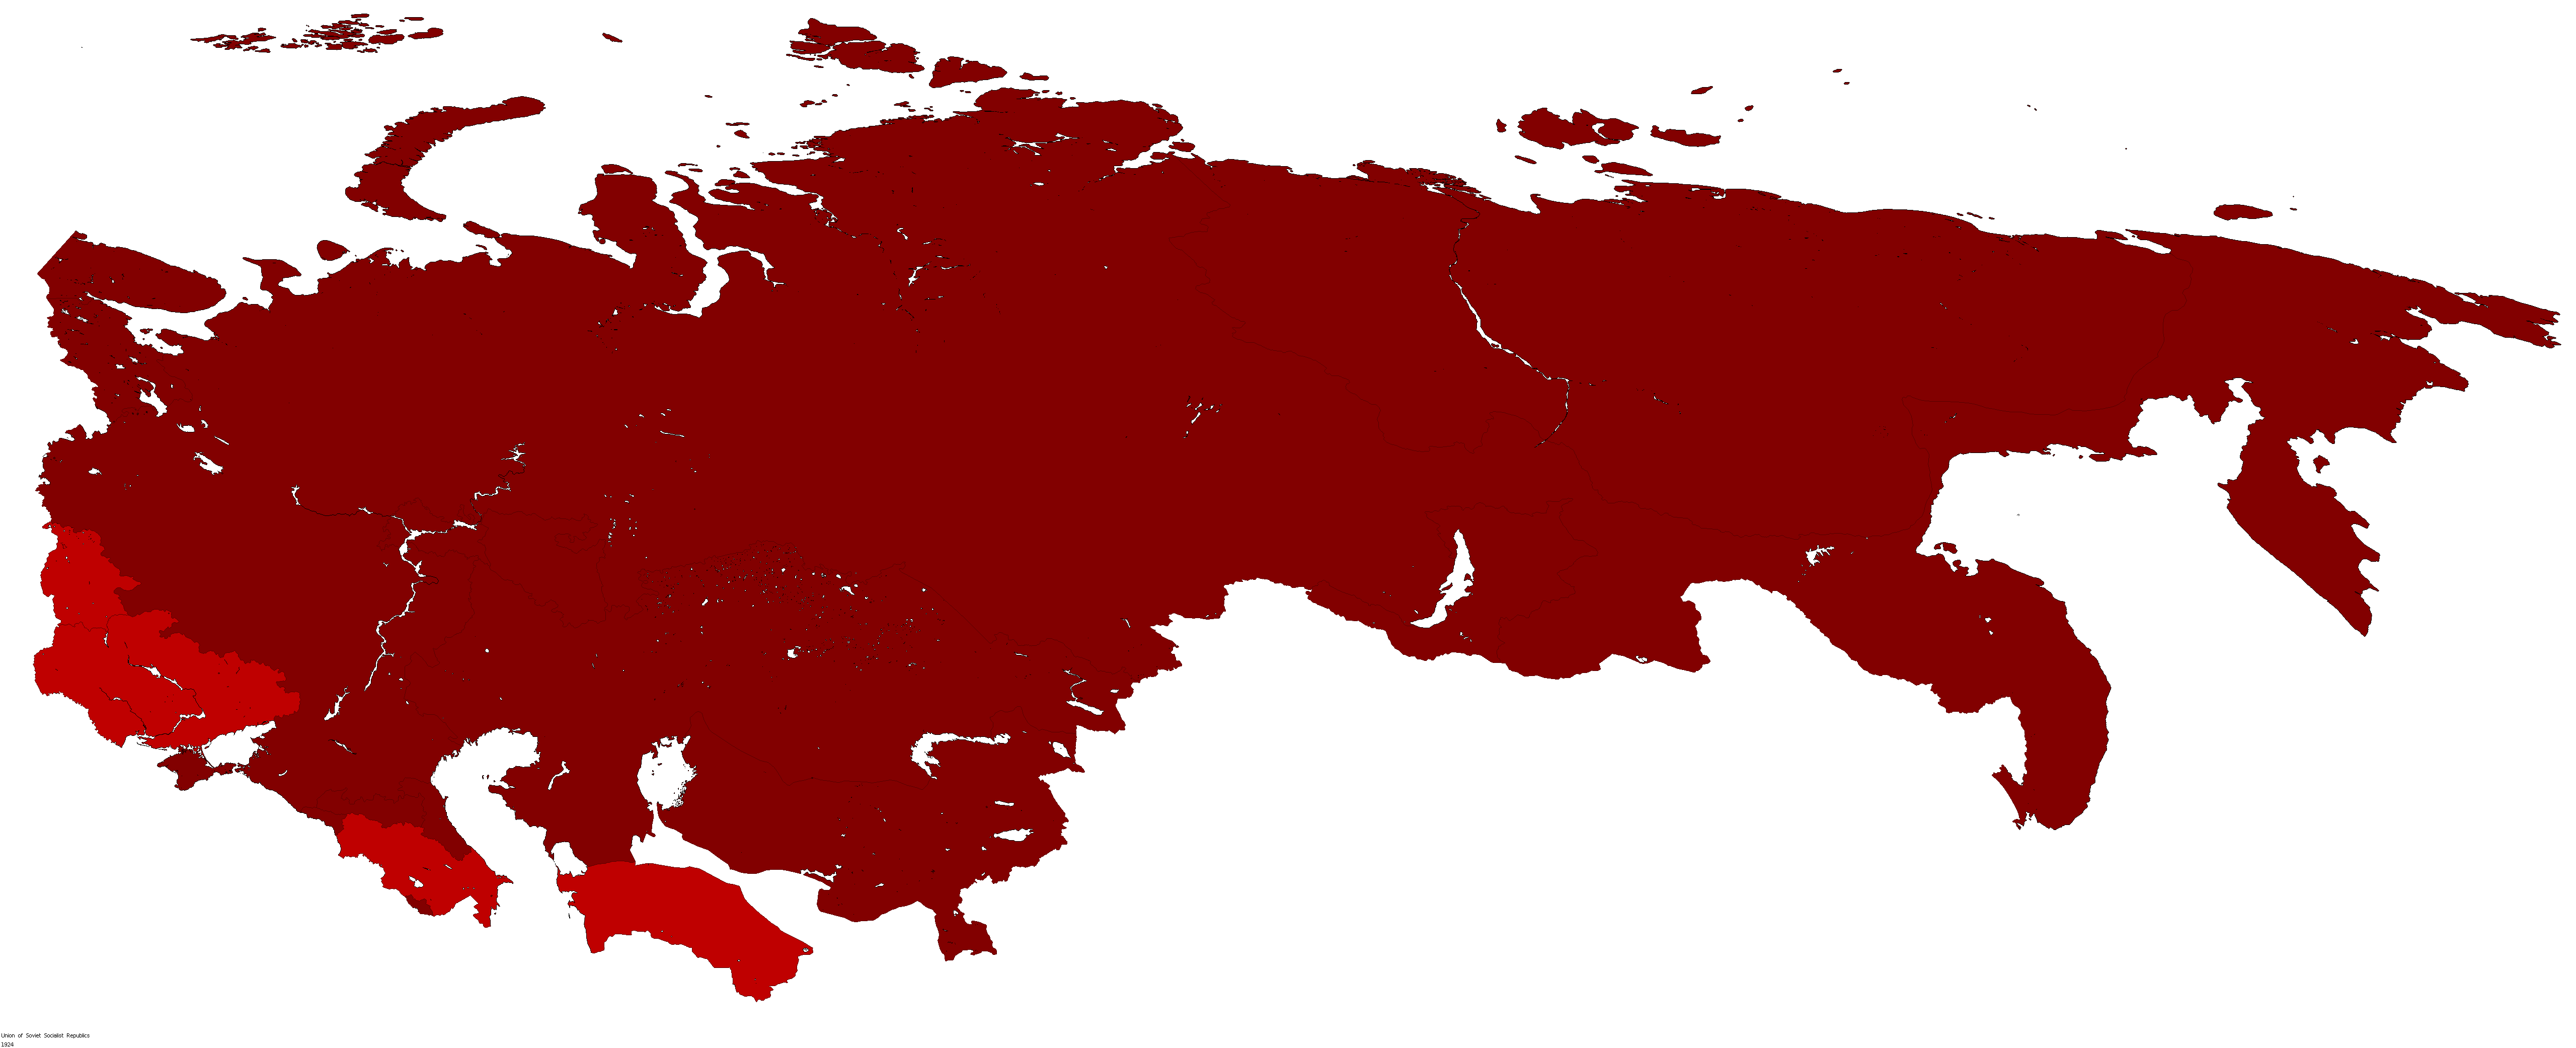 USSR_03_1924_COLORED.png